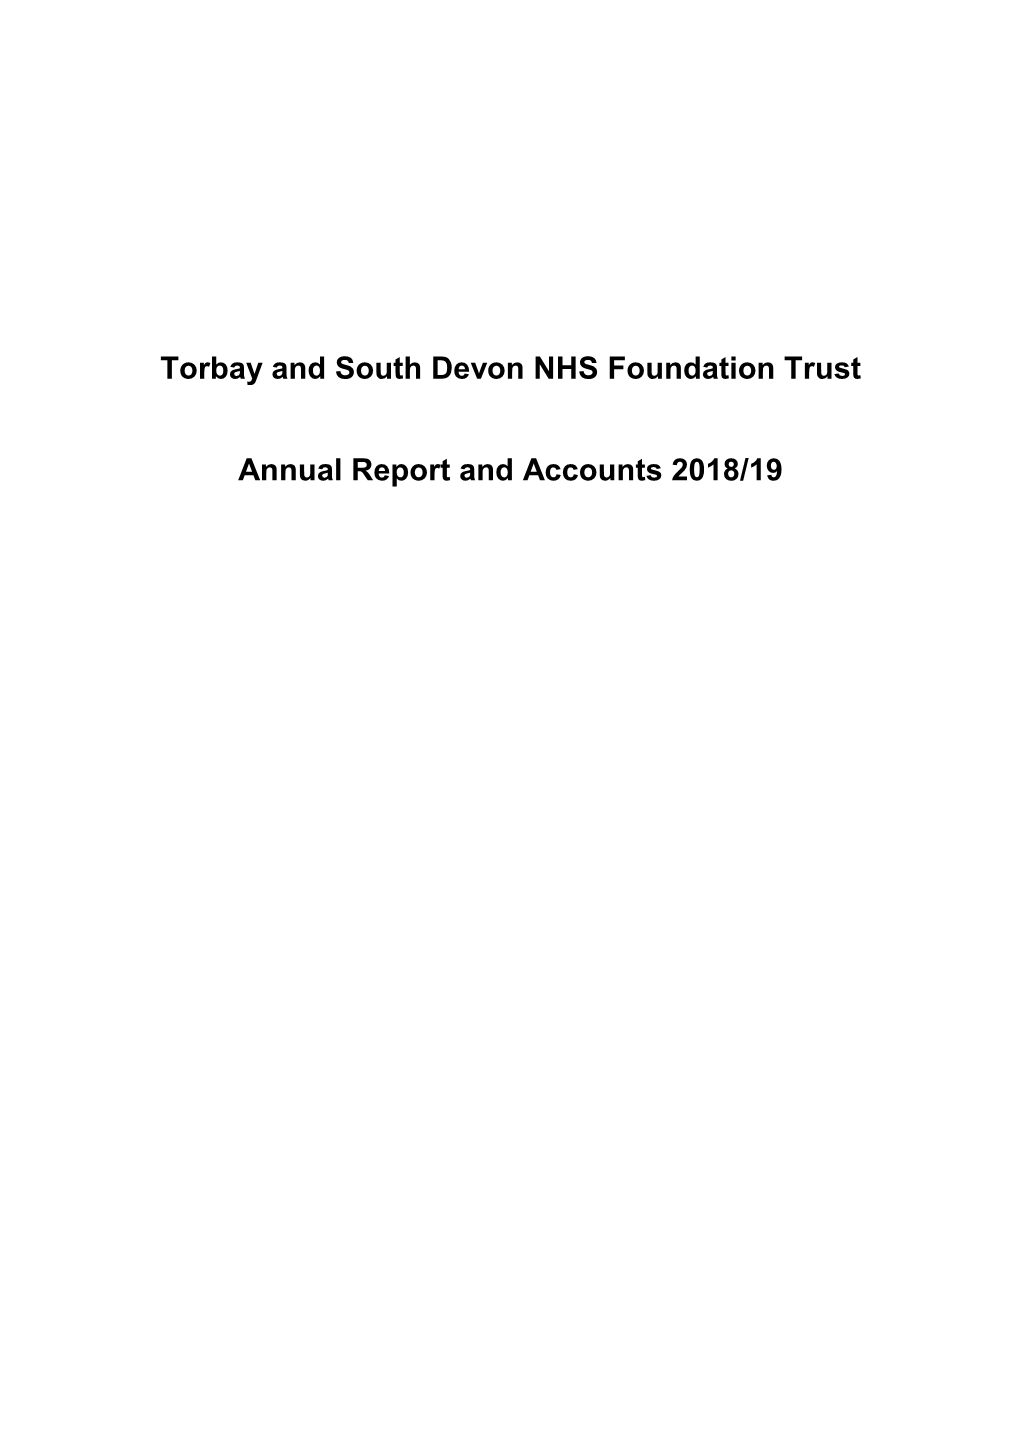 Torbay and South Devon NHS Foundation Trust Annual Report and Accounts 2018/19